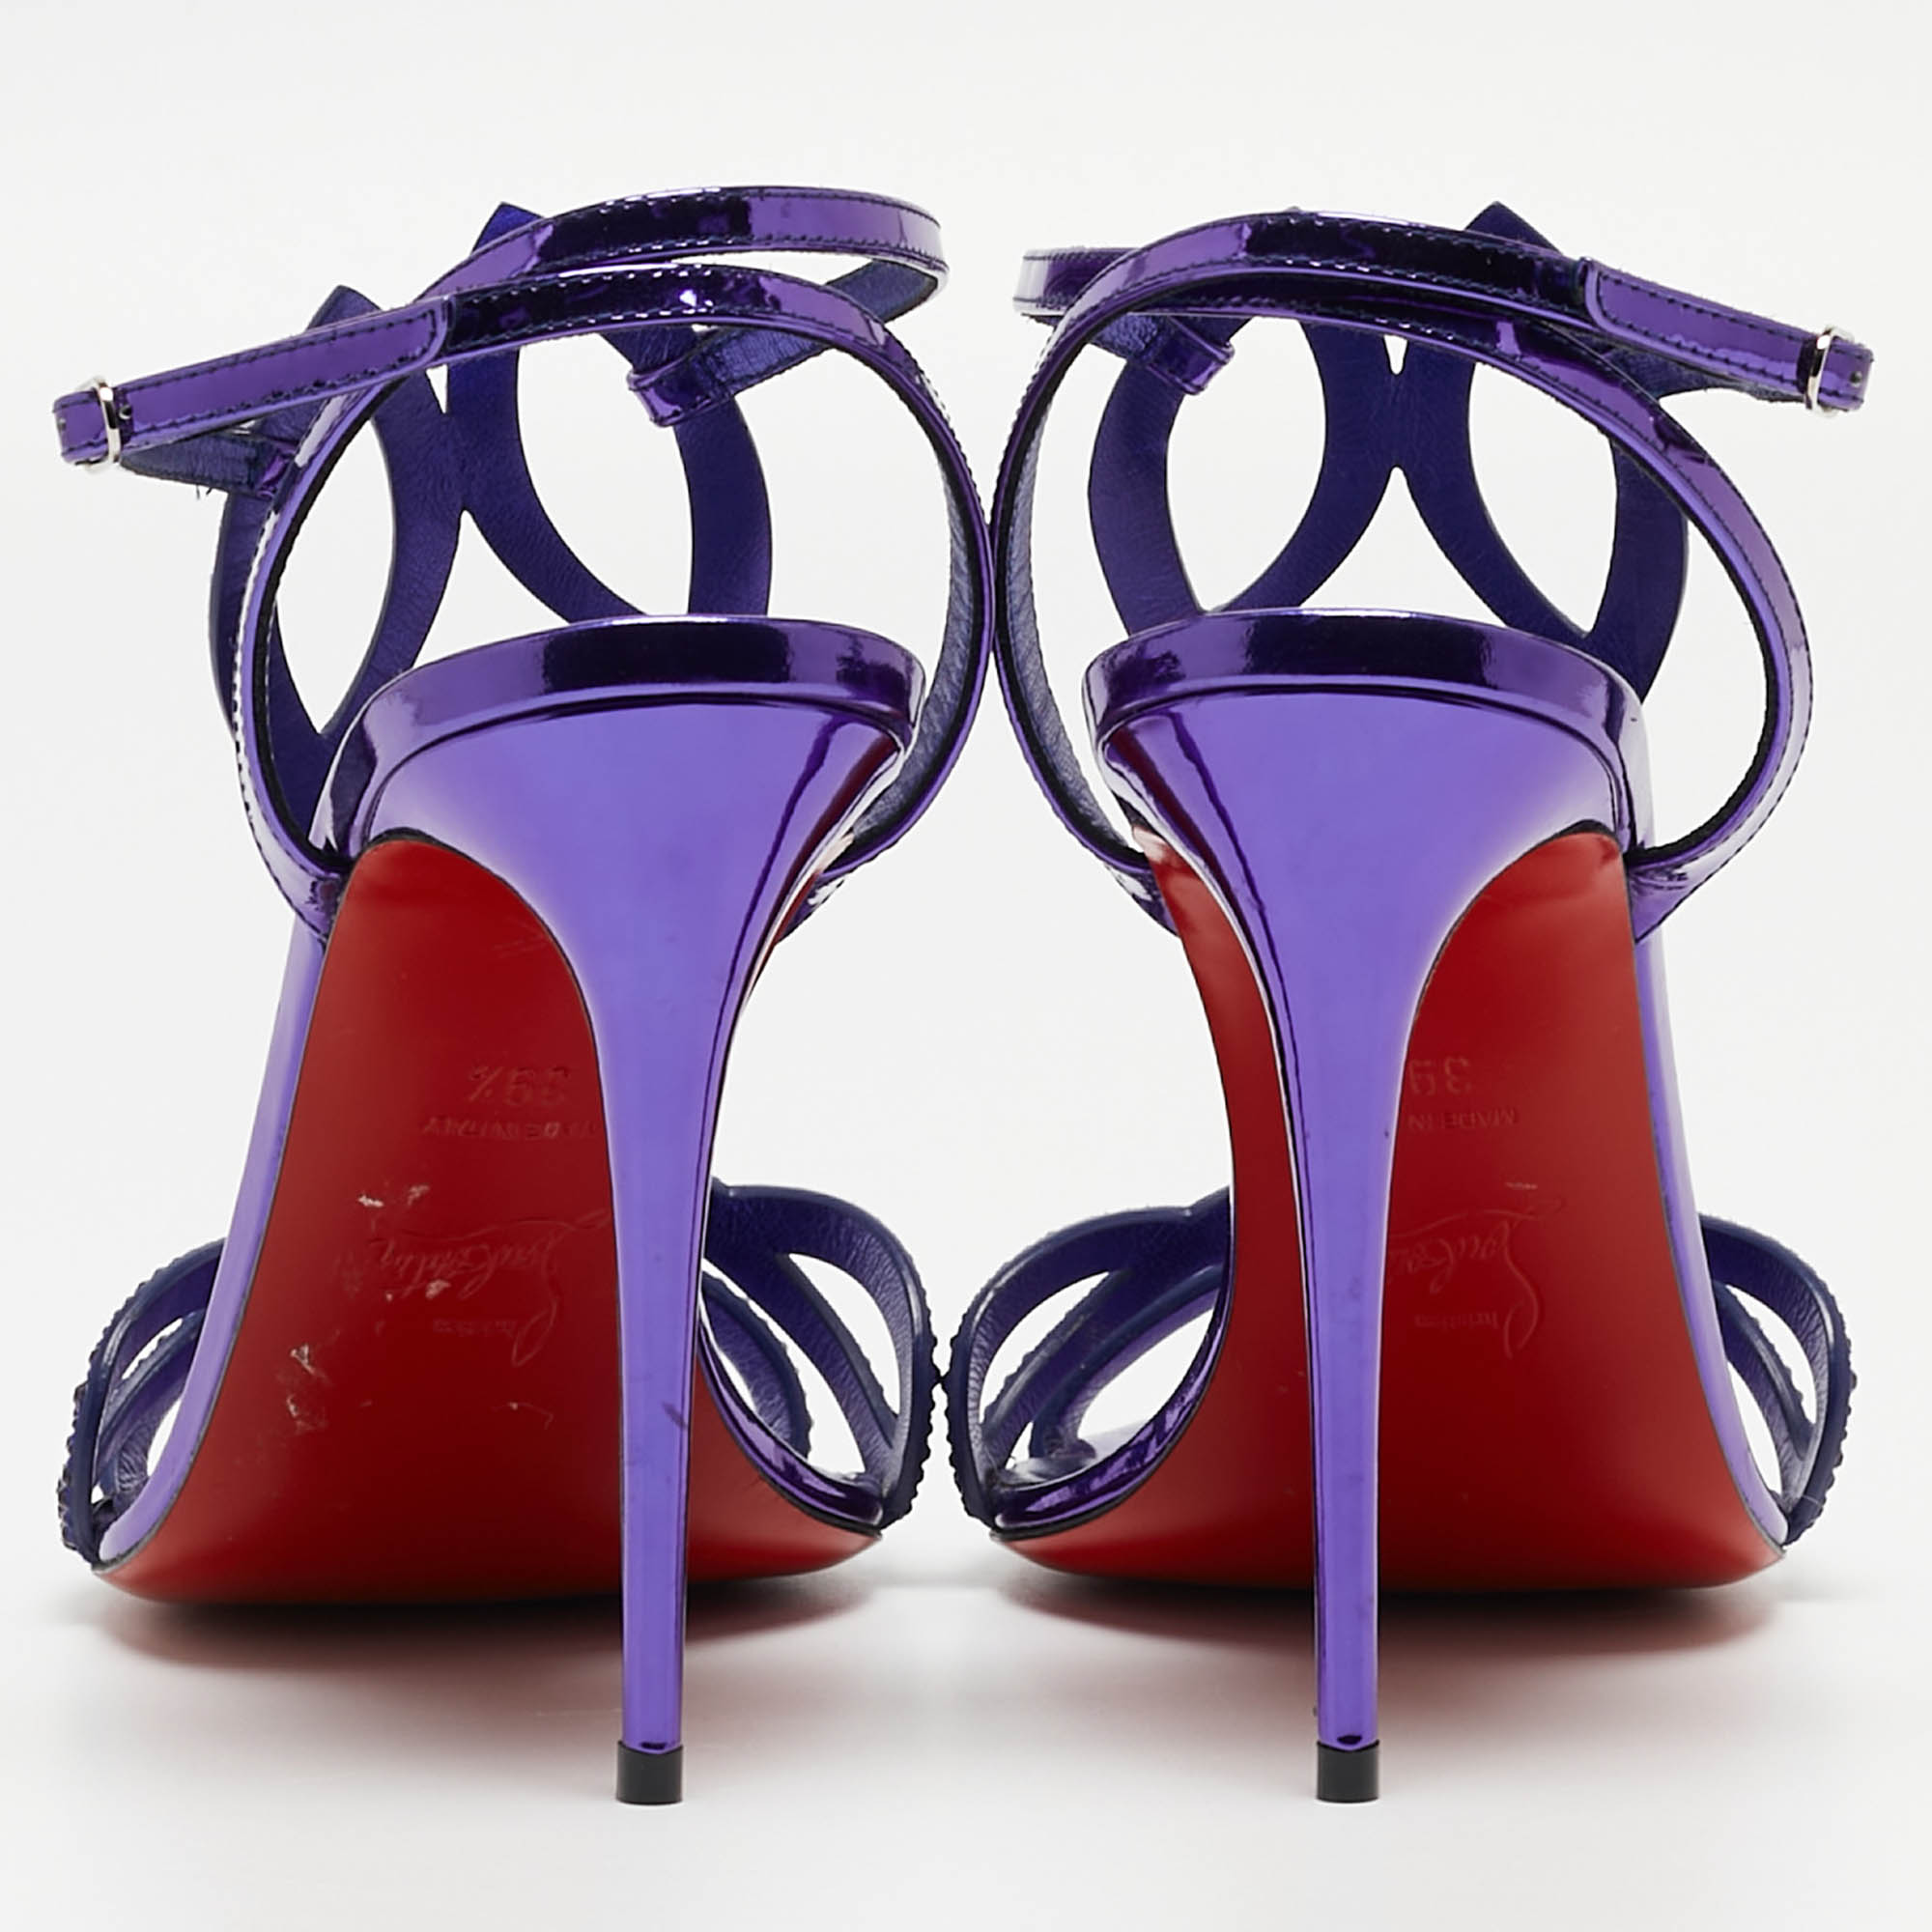 Christian Louboutin Purple Crystal Embellished Patent Leather Double L Sandals Size 39.5